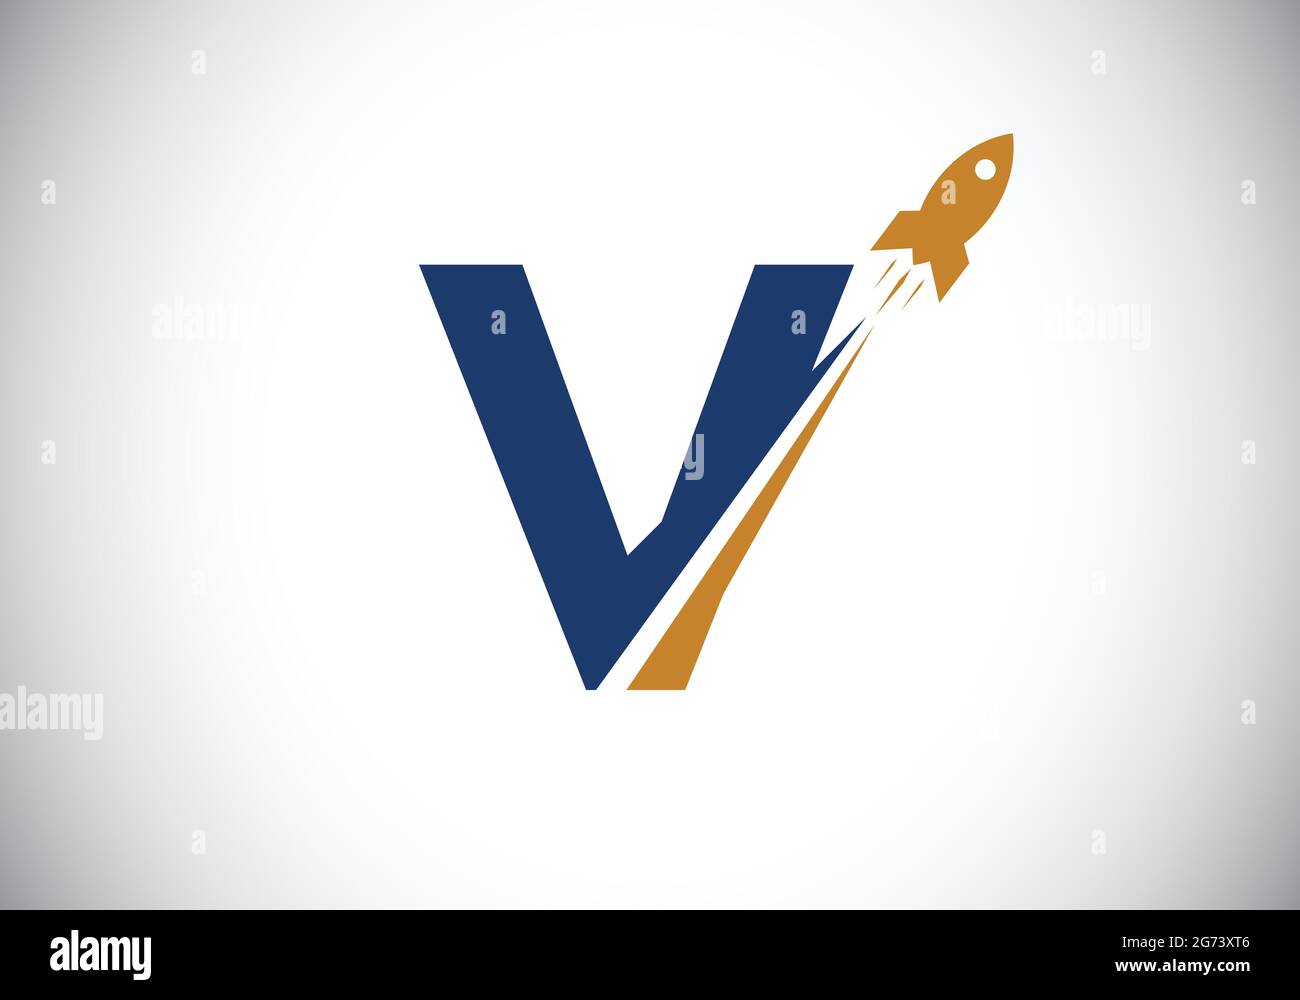 Initial V monogram letter alphabet with a Rocket logo design. Rocket icon. Font emblem. Modern vector logotype for business and company identity. Stock Vector